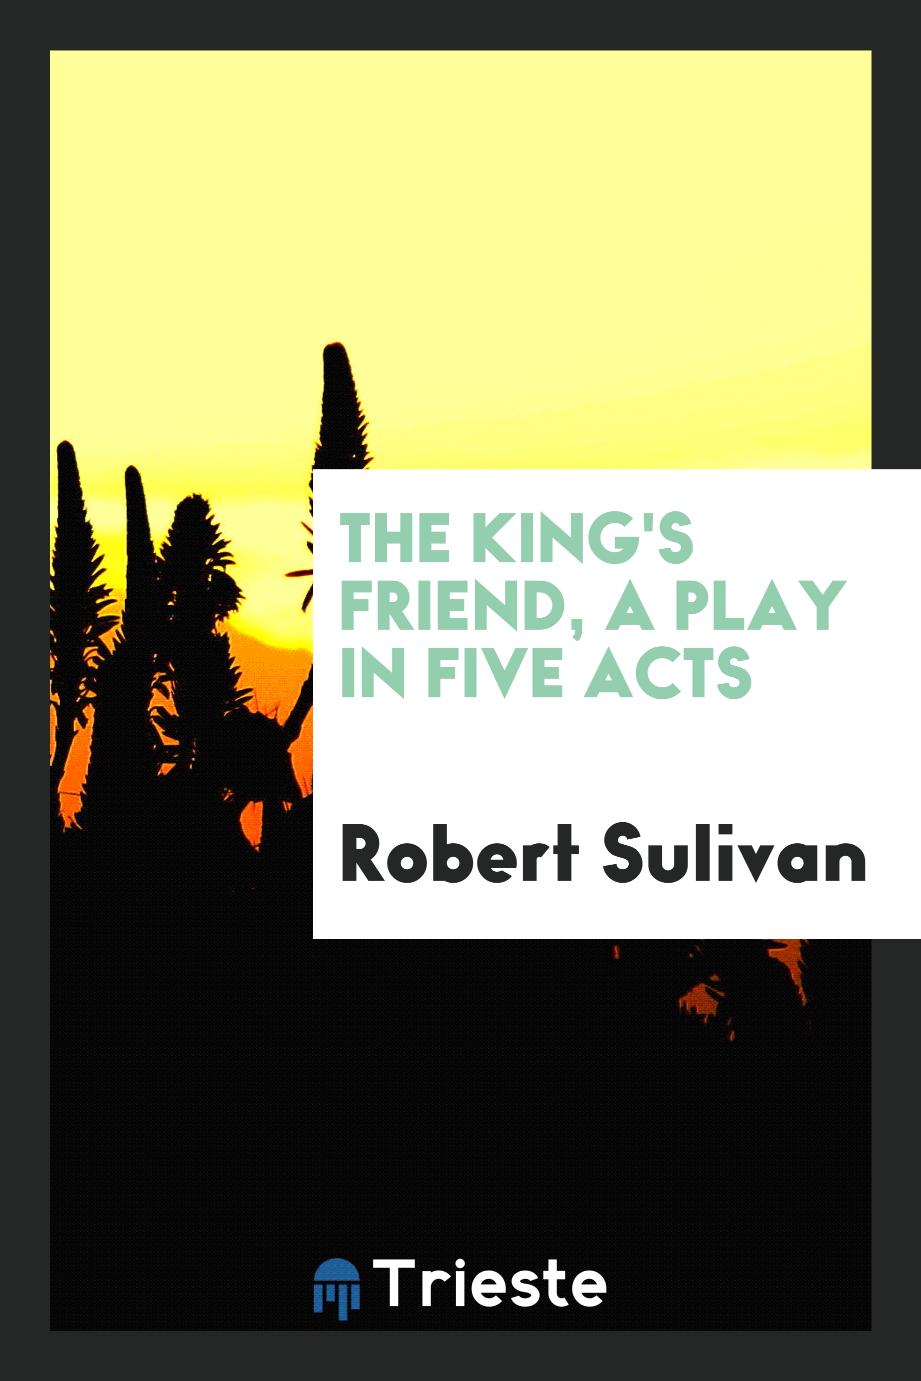 The king's friend, a play in five acts